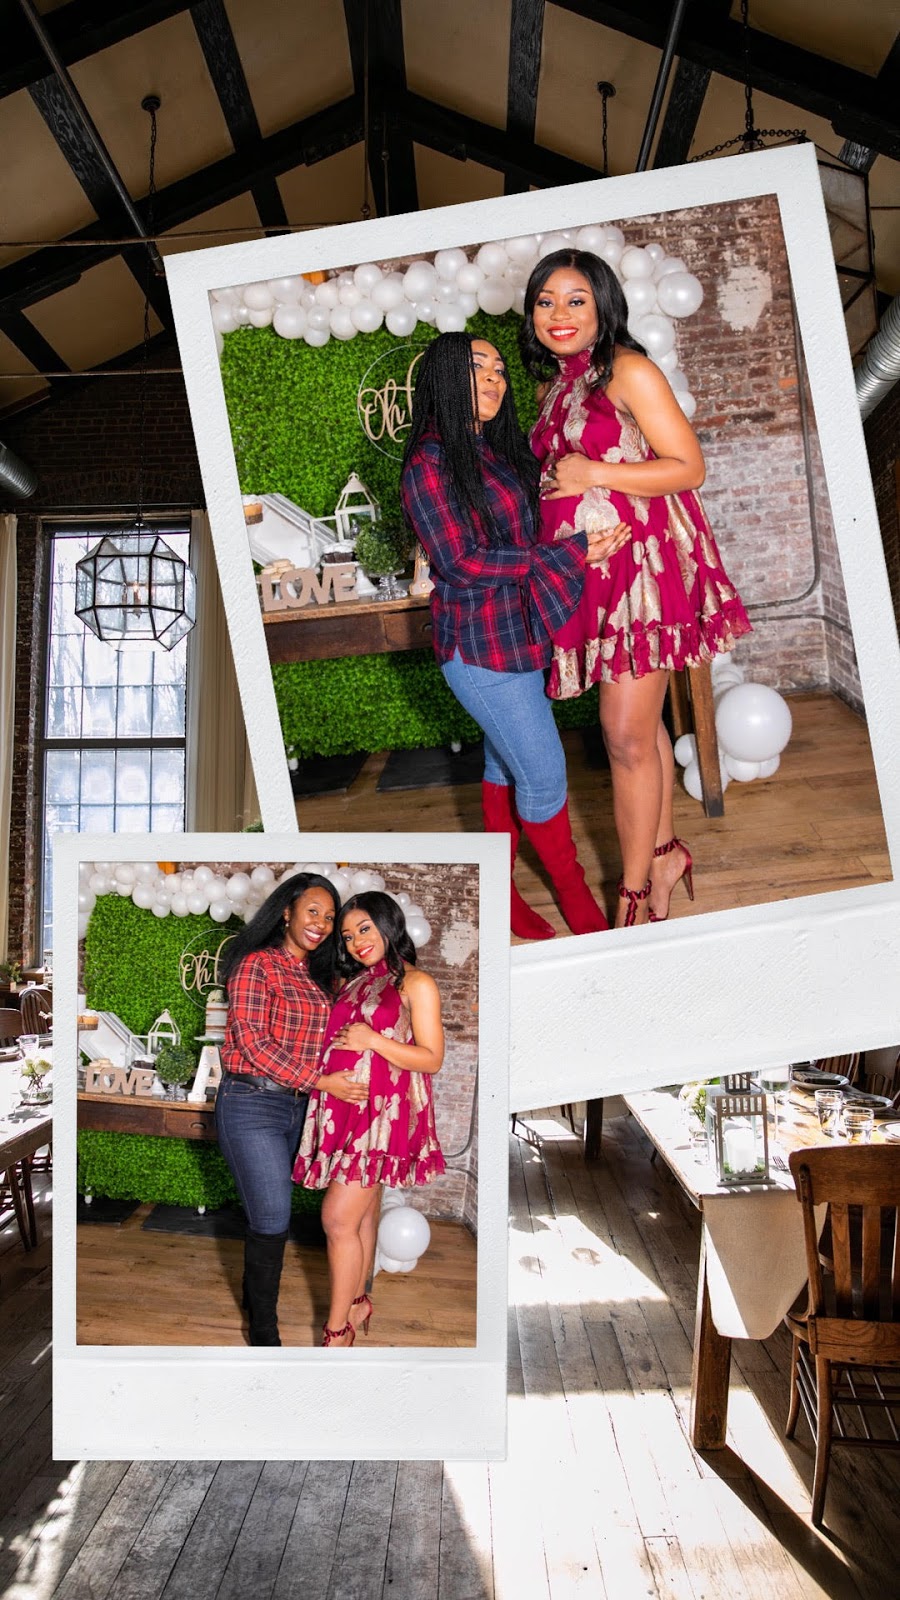 Stella-Adewunmi-of-Jadore-Fashion-share-baby-shower-outfit-and-friends